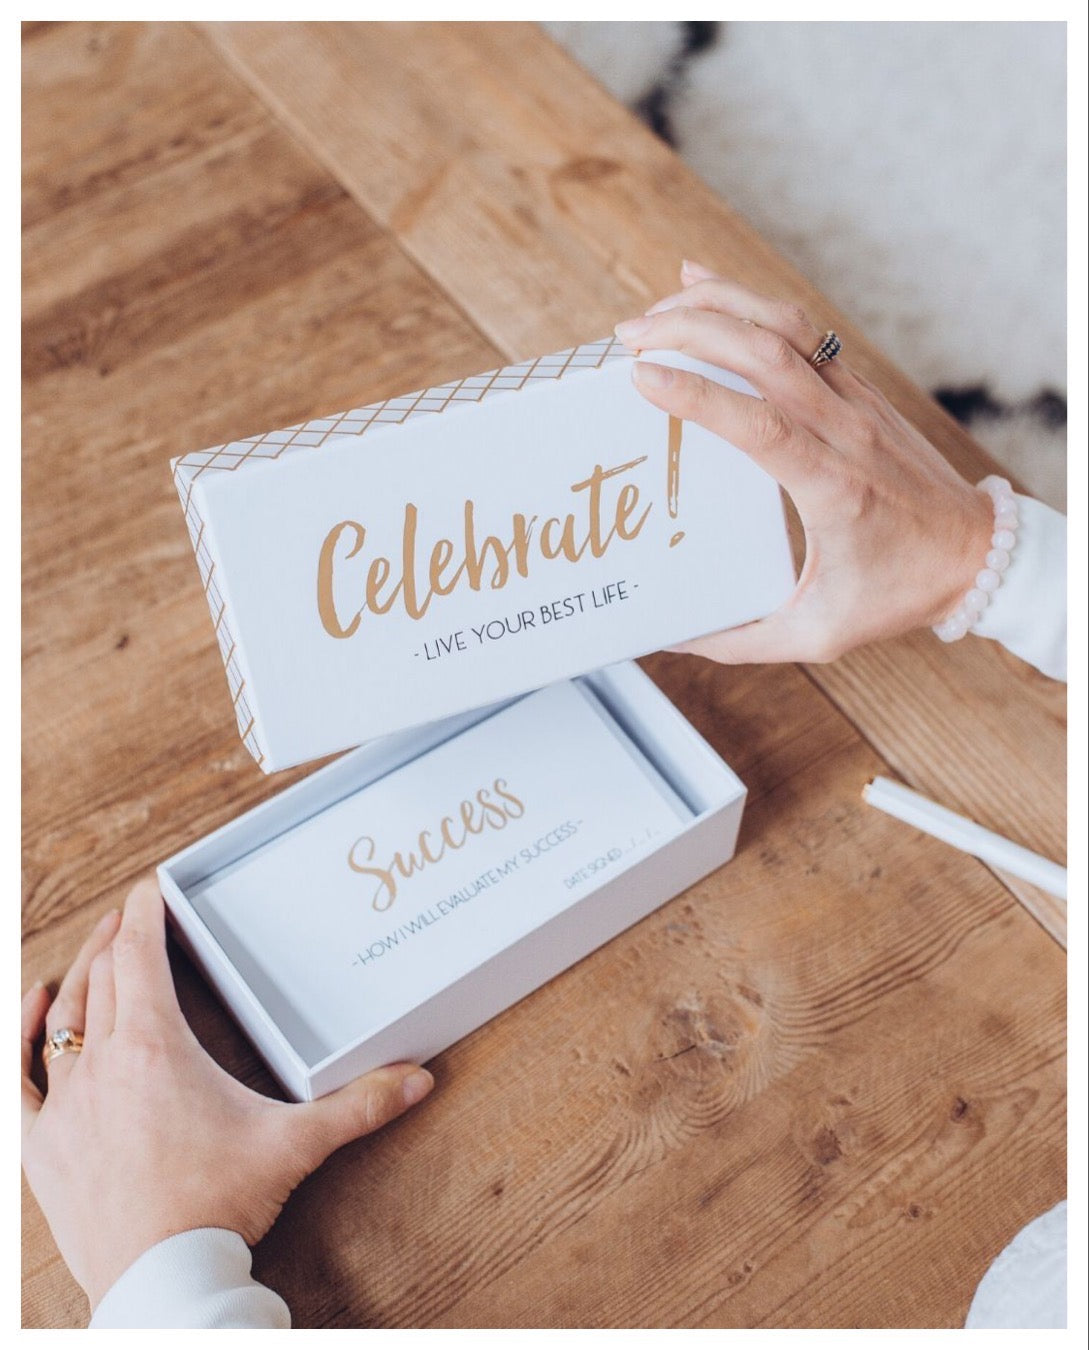 Celebrate! Live Your Best Life Inspiration Box